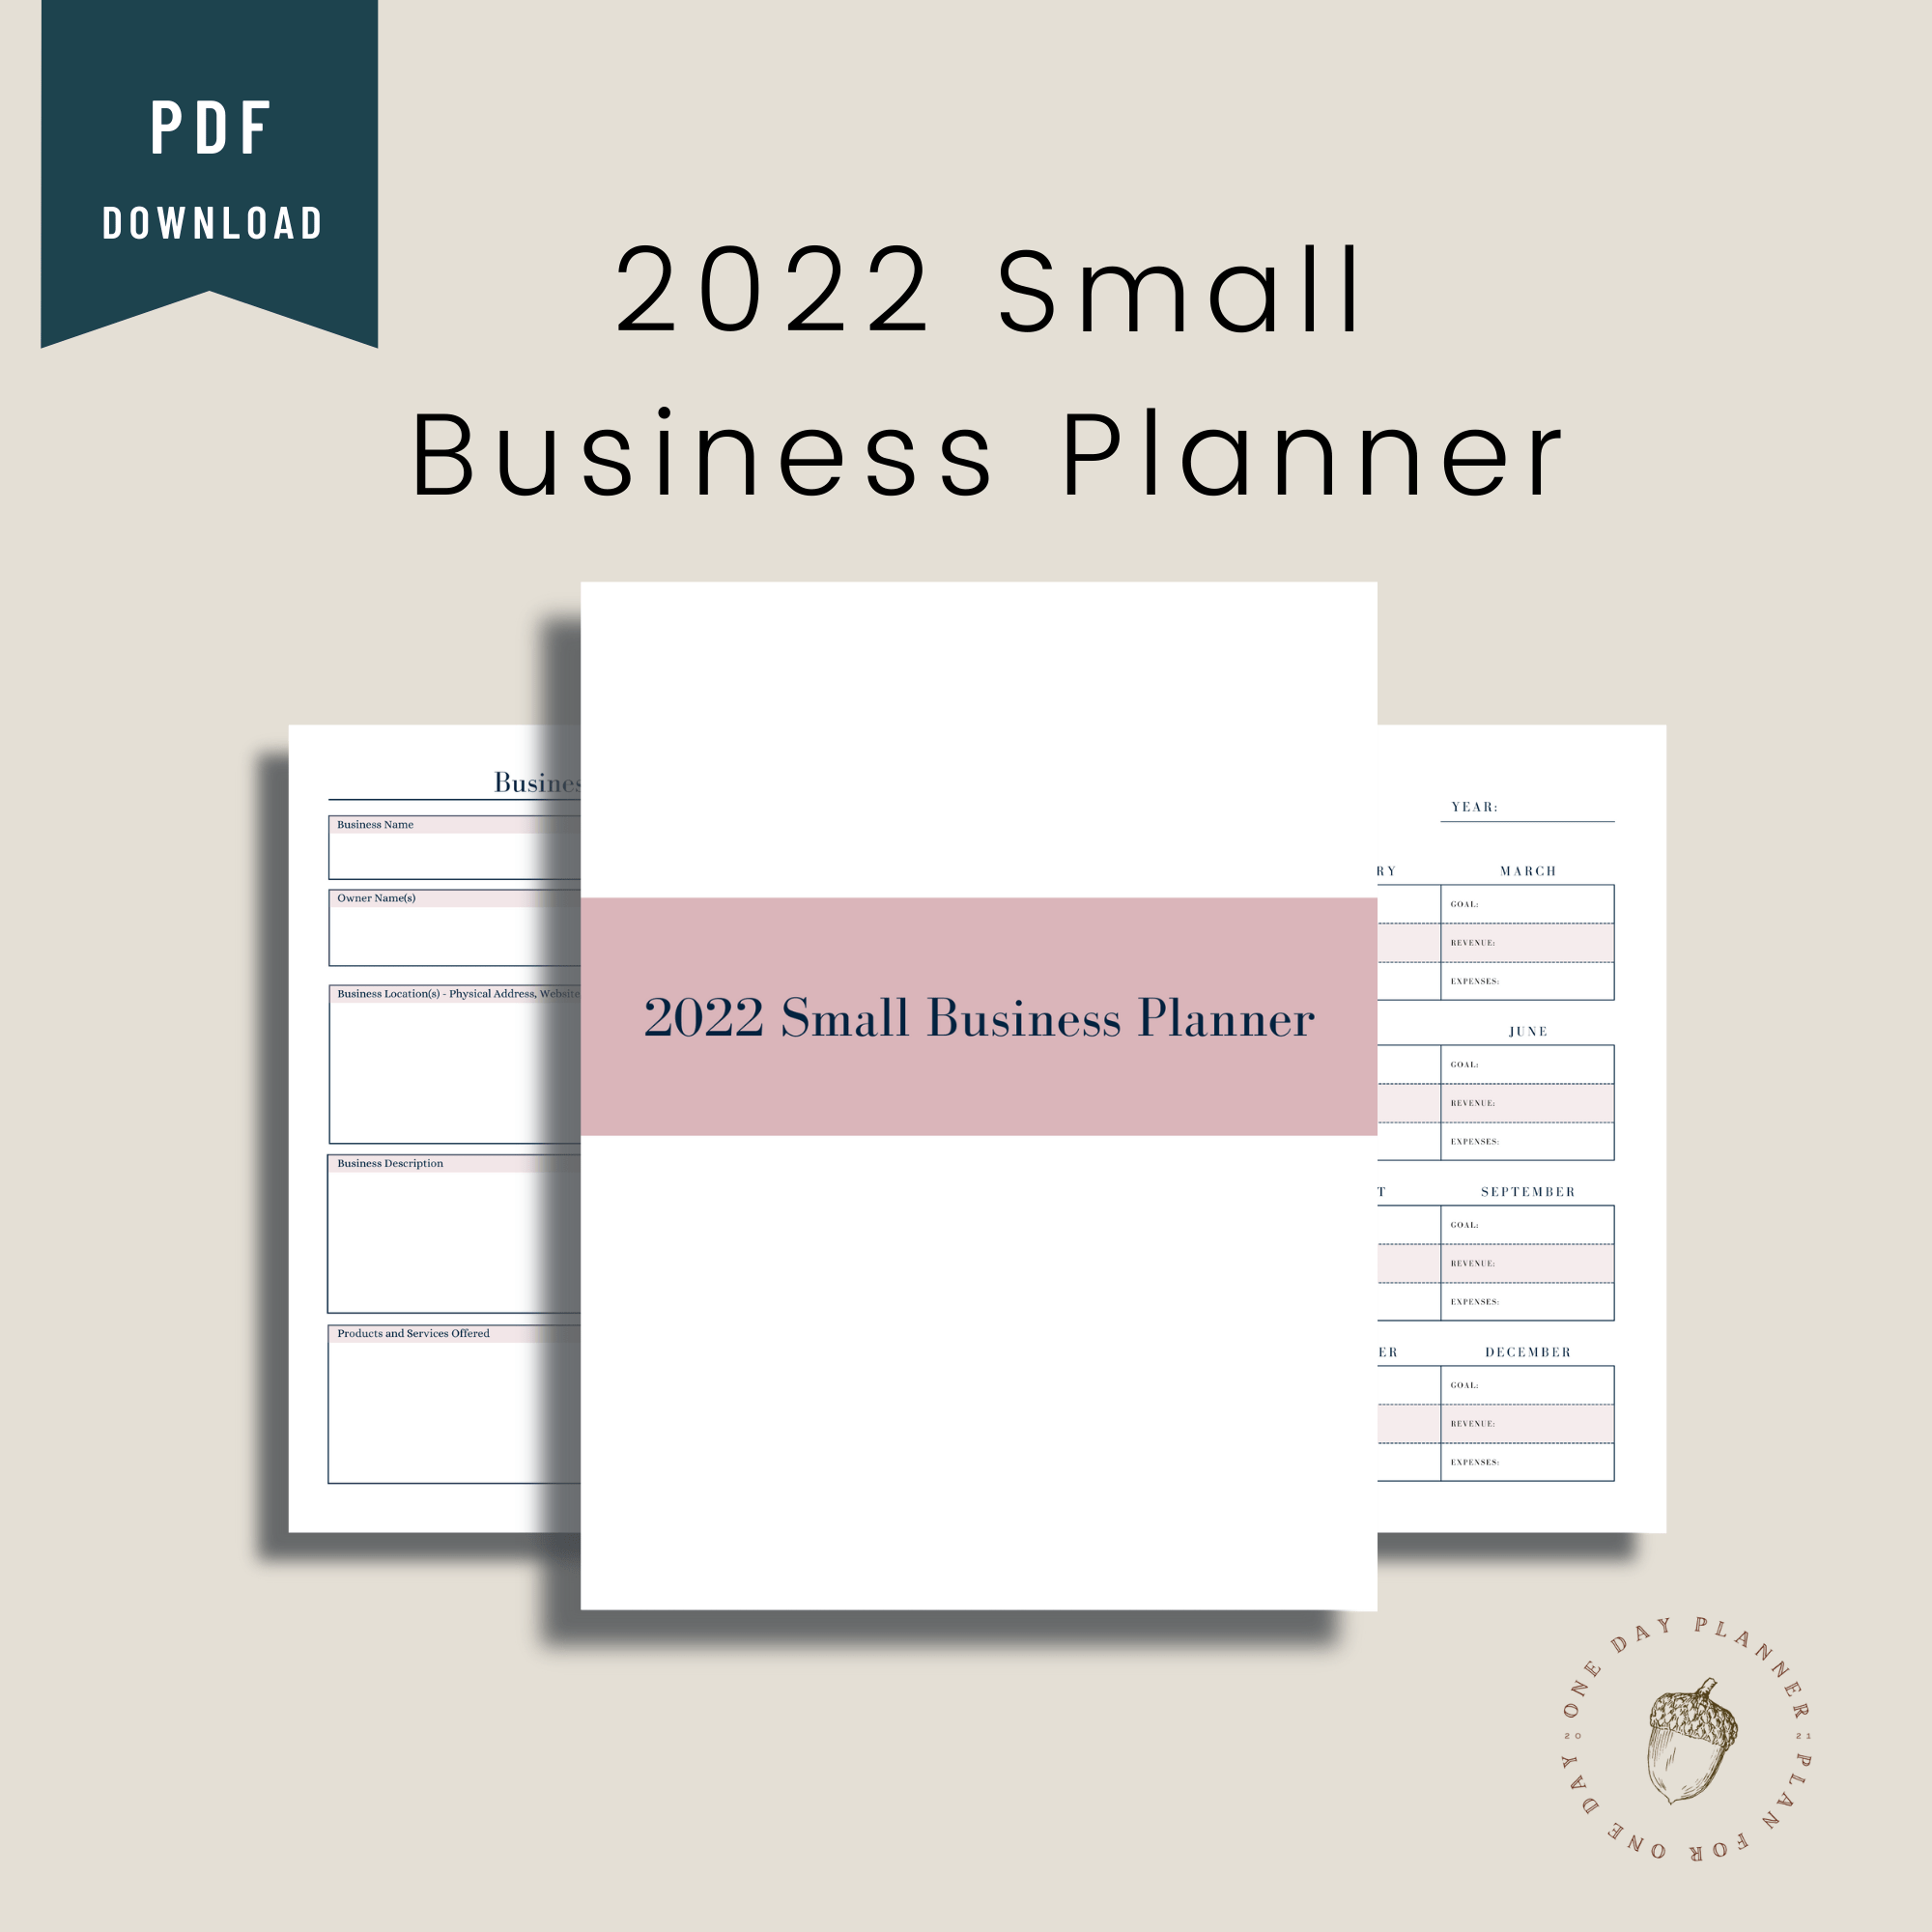 2022 Small Business Planner